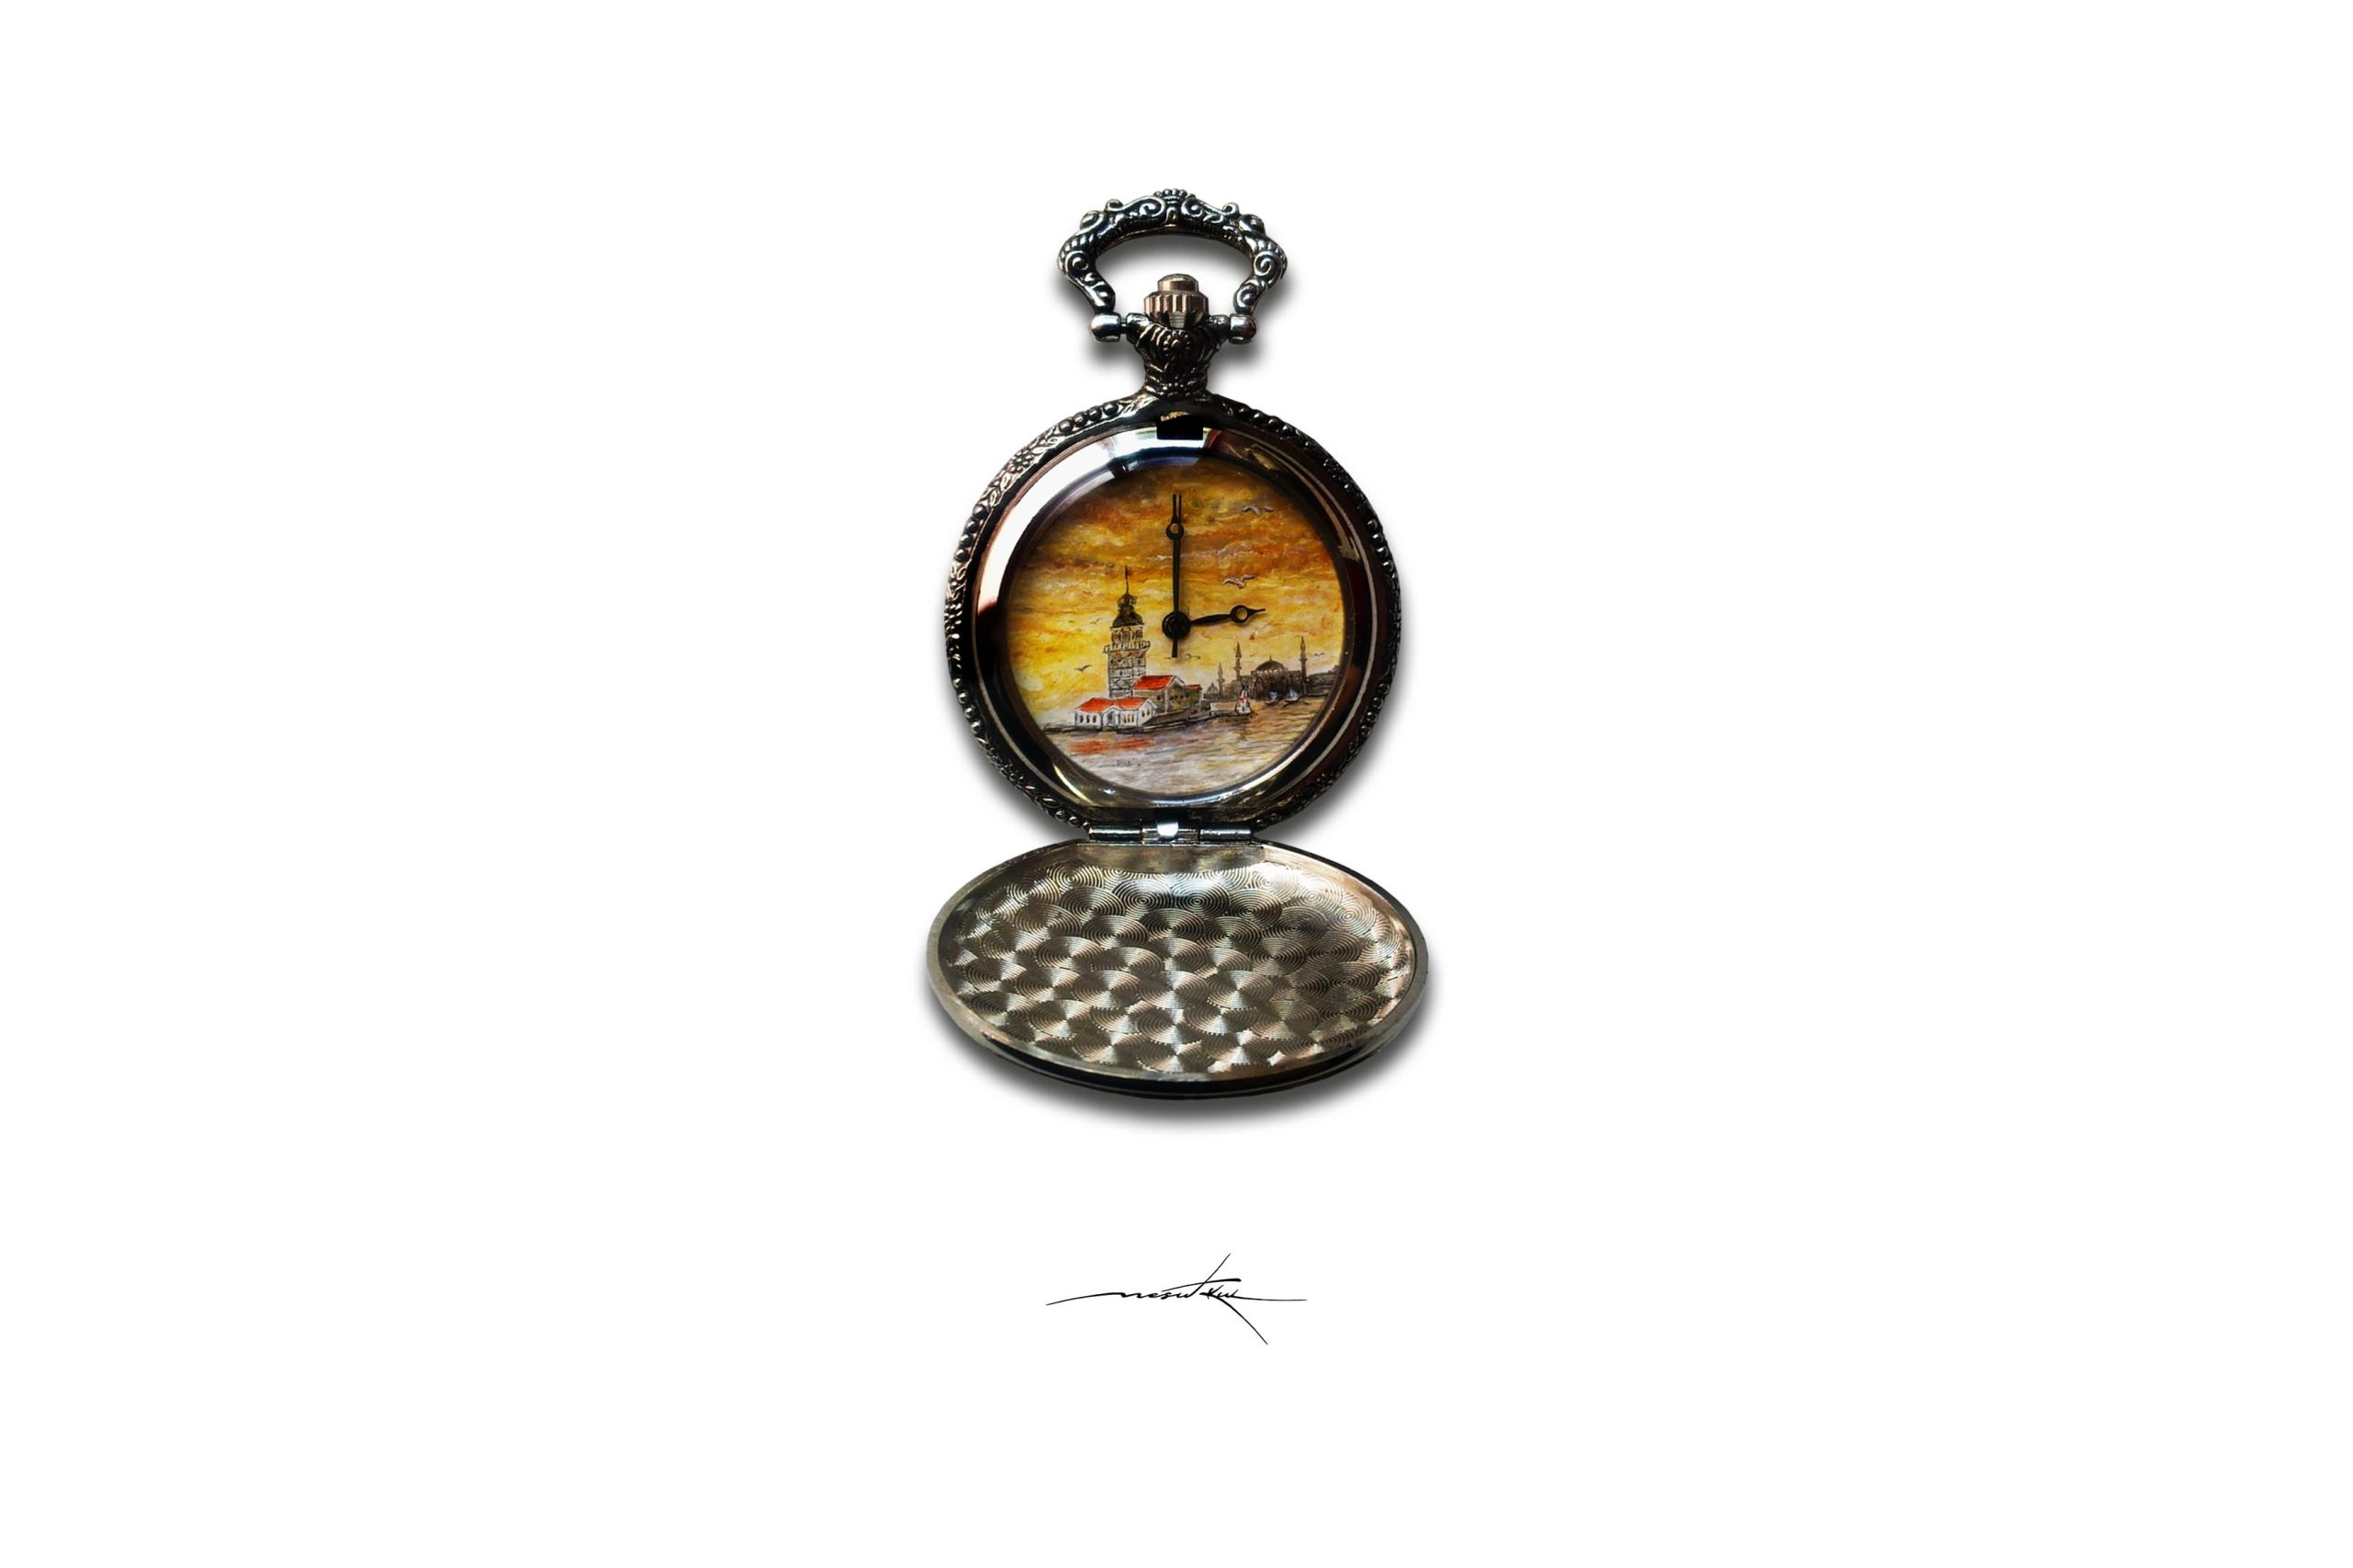 The Maiden’s Tower on the pocket watch